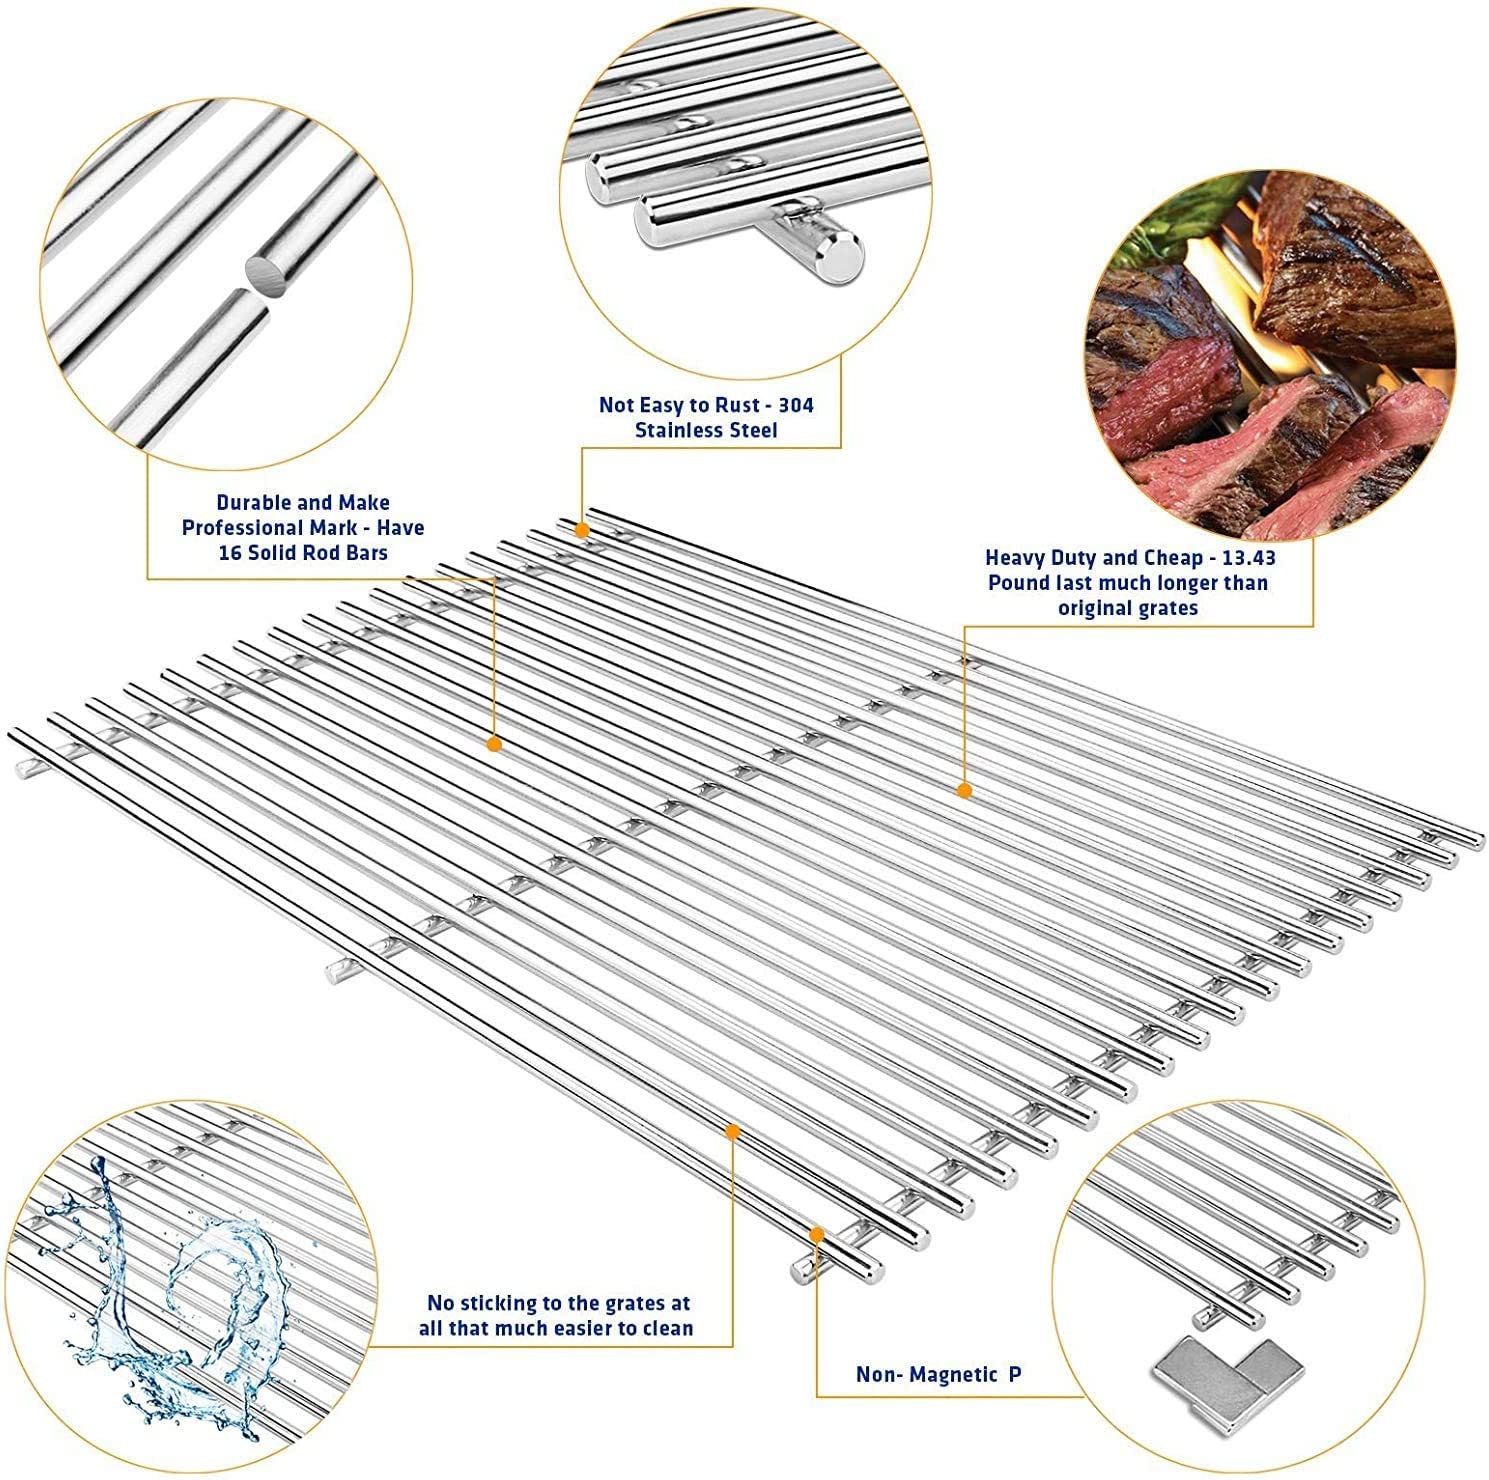 Grisun 7639 304 Stainless Steel Cooking Grates for Weber Spirit and Spirit II 300 Series Spirit E-310 E-330 E/S320 Genesis Silver/Gold B & C Genesis Platinum B & C Grill Replacement Part Grates 17.3" - image 2 of 13